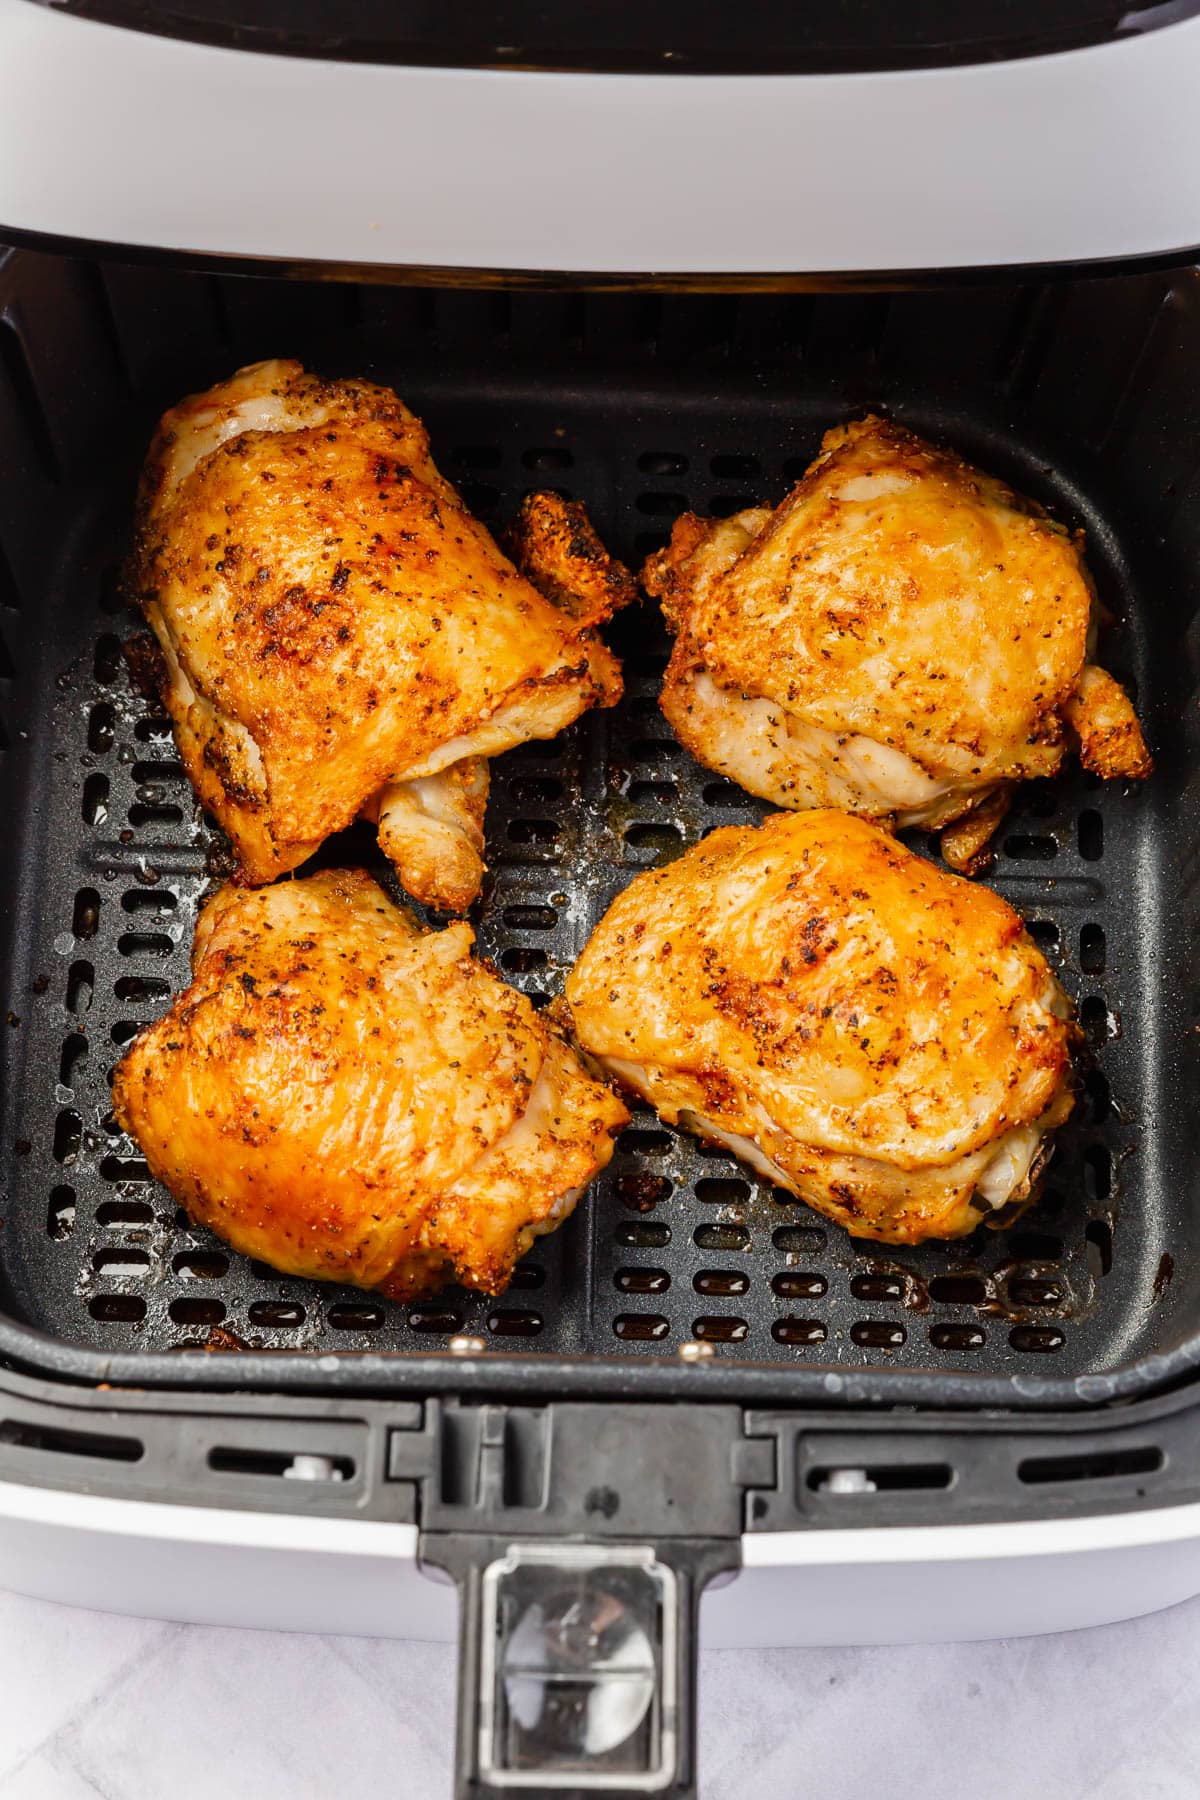 Four crispy bone-in chicken thighs in an air fryer basket after cooking.